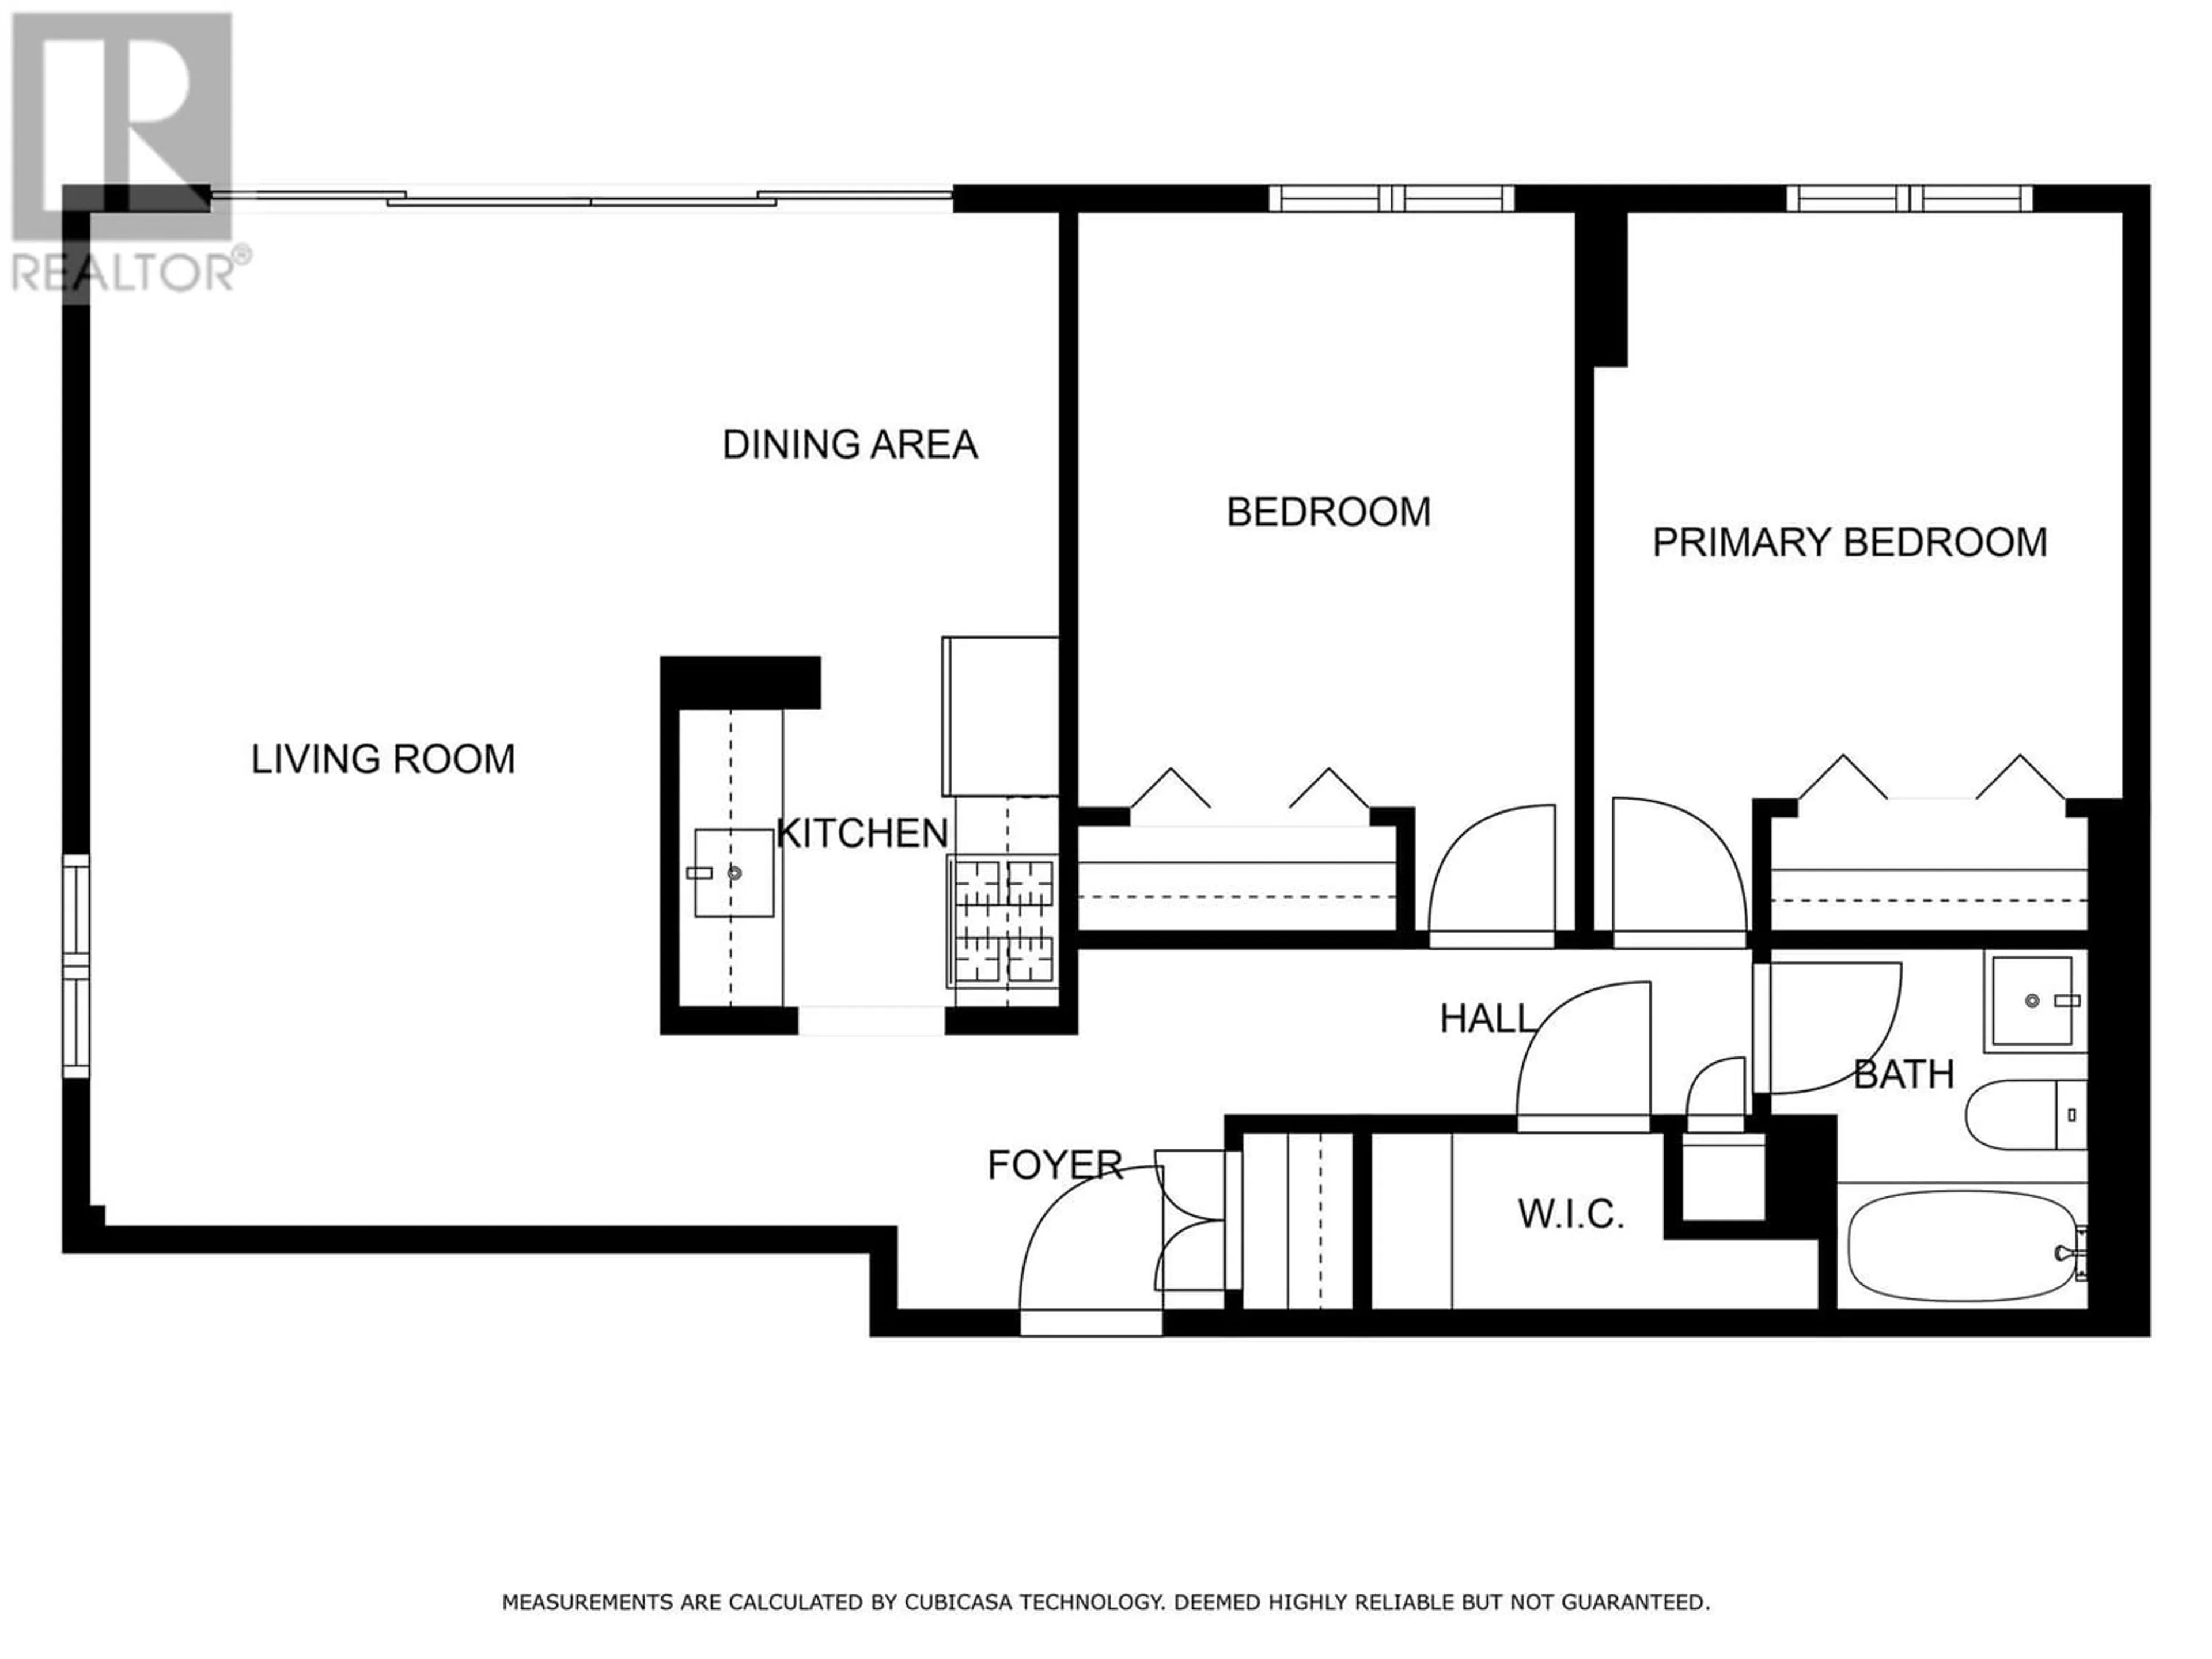 Floor plan for 408 1501 QUEENSWAY STREET, Prince George British Columbia V2L1L5